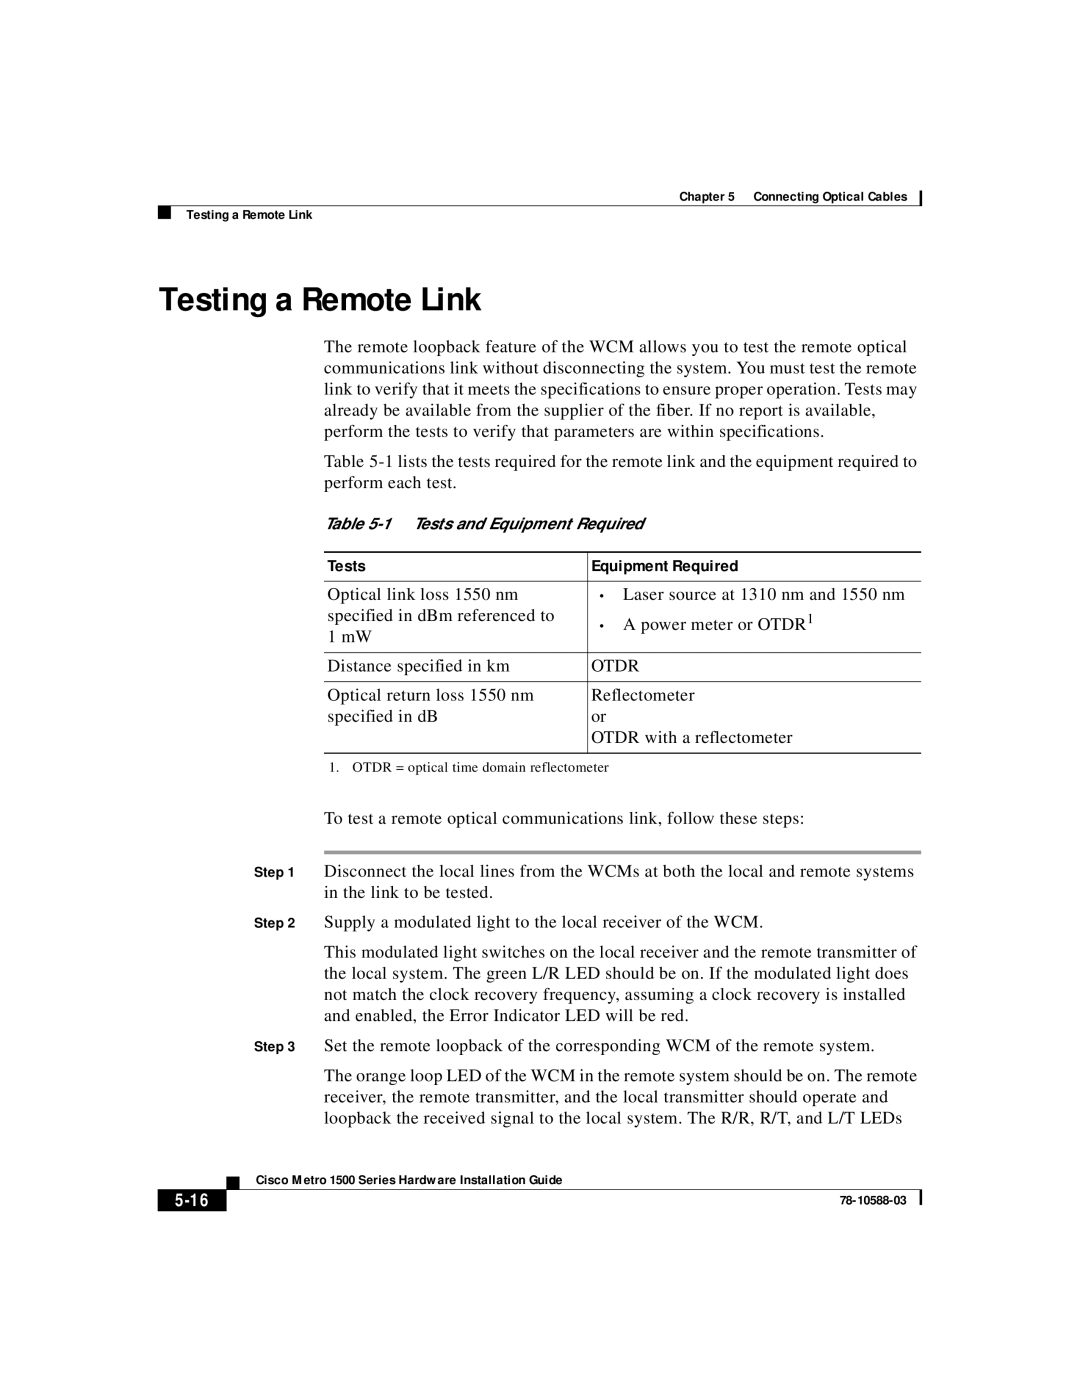 Cisco Systems 1500 manual Testing a Remote Link, Tests, Equipment Required, 5-16 